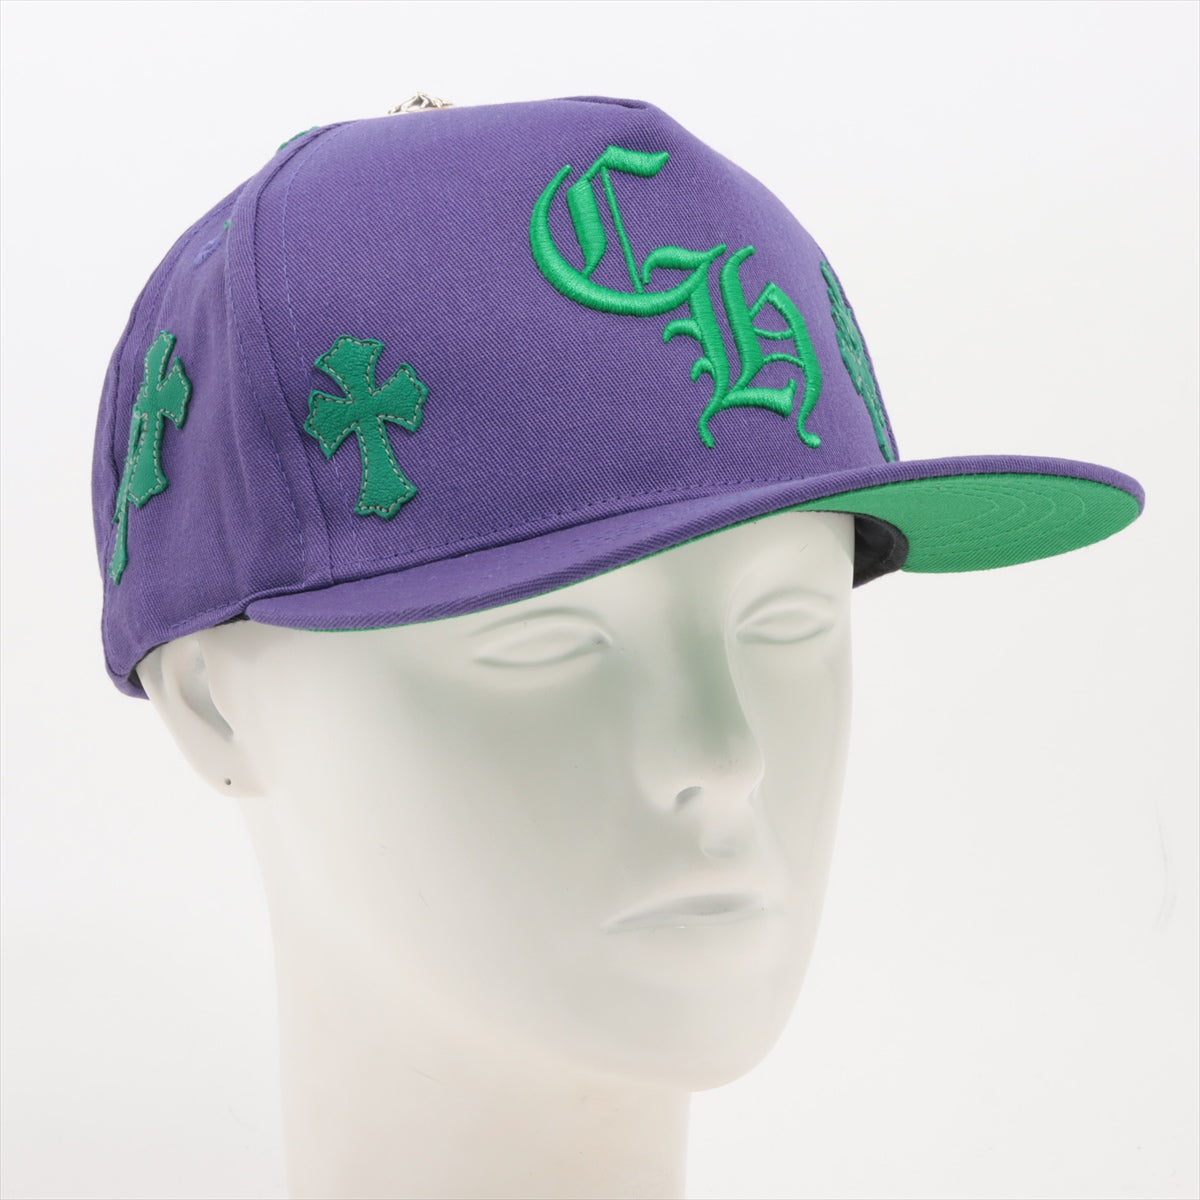 Chrome Hearts baseball cap Cotton & Polyester ONE SIZE purple x green with cross patch